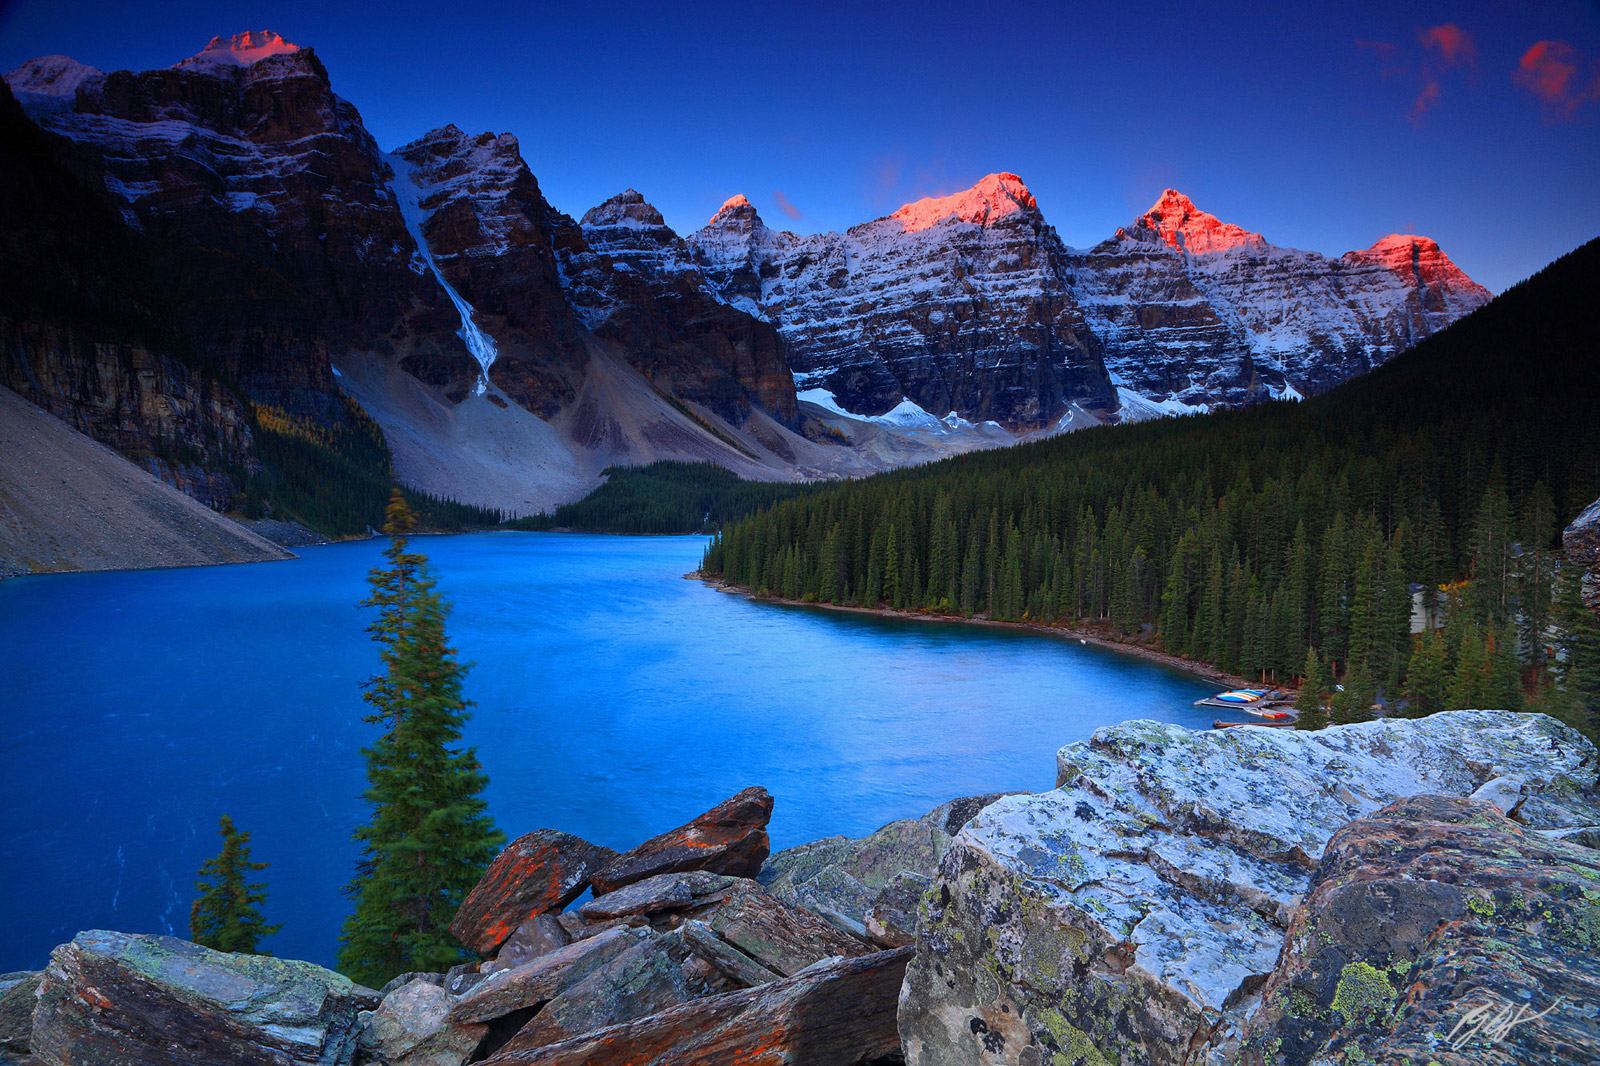 Sunrise over Moraine Lake with the Ten Peak in Banff National Park in Canada